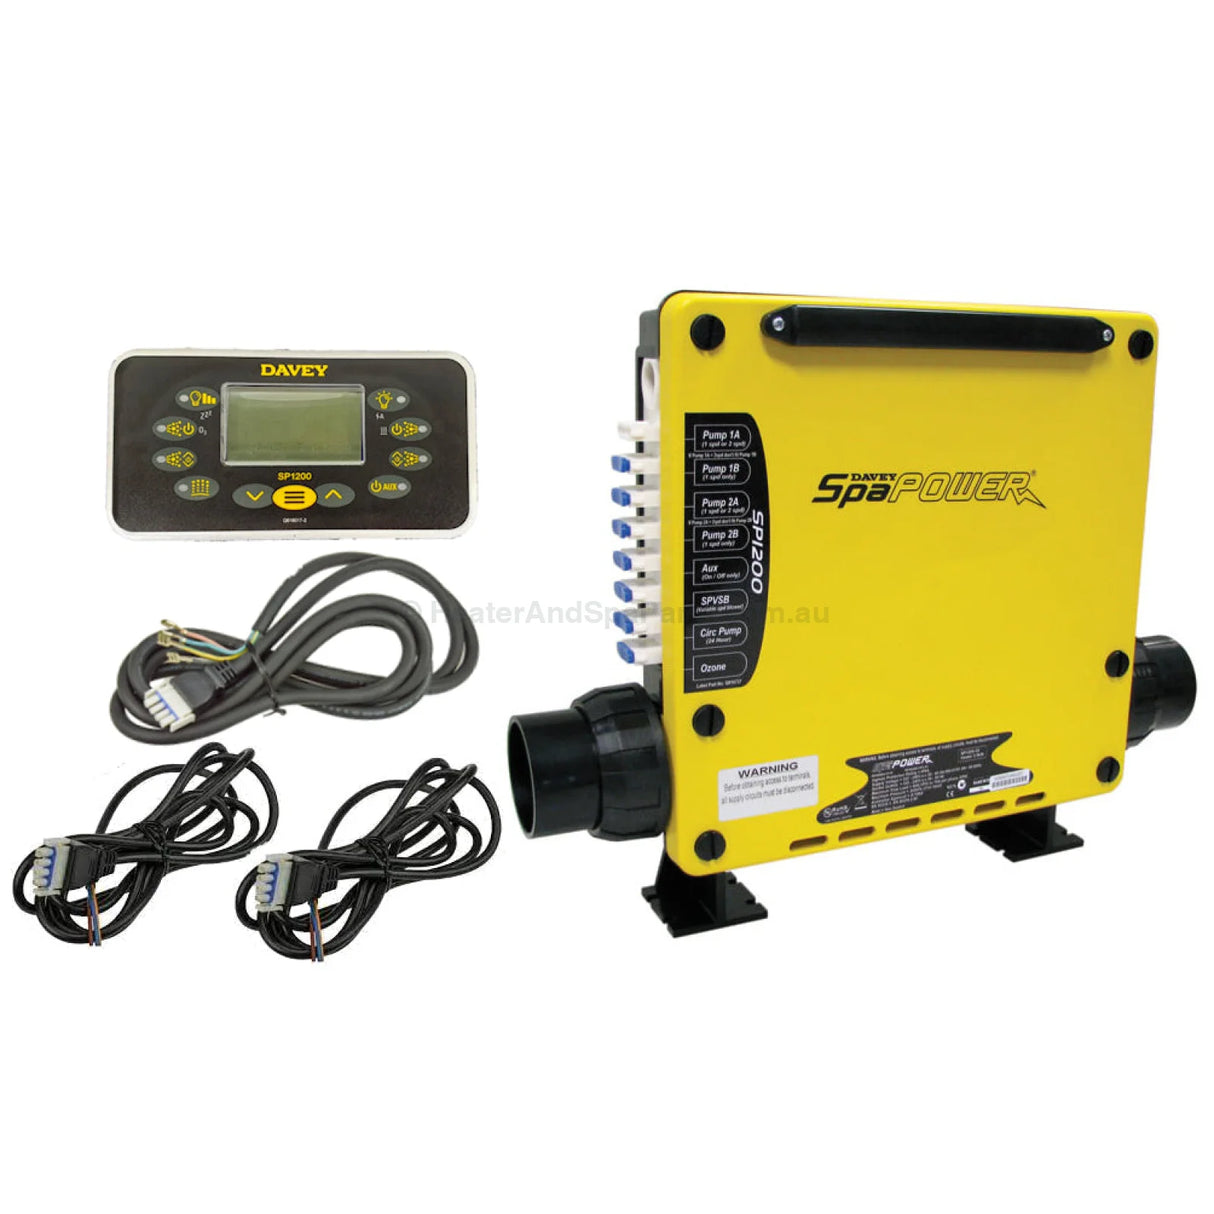 Spa Power 1000 Replacement Kit - Also 2000 Digital Control Systems